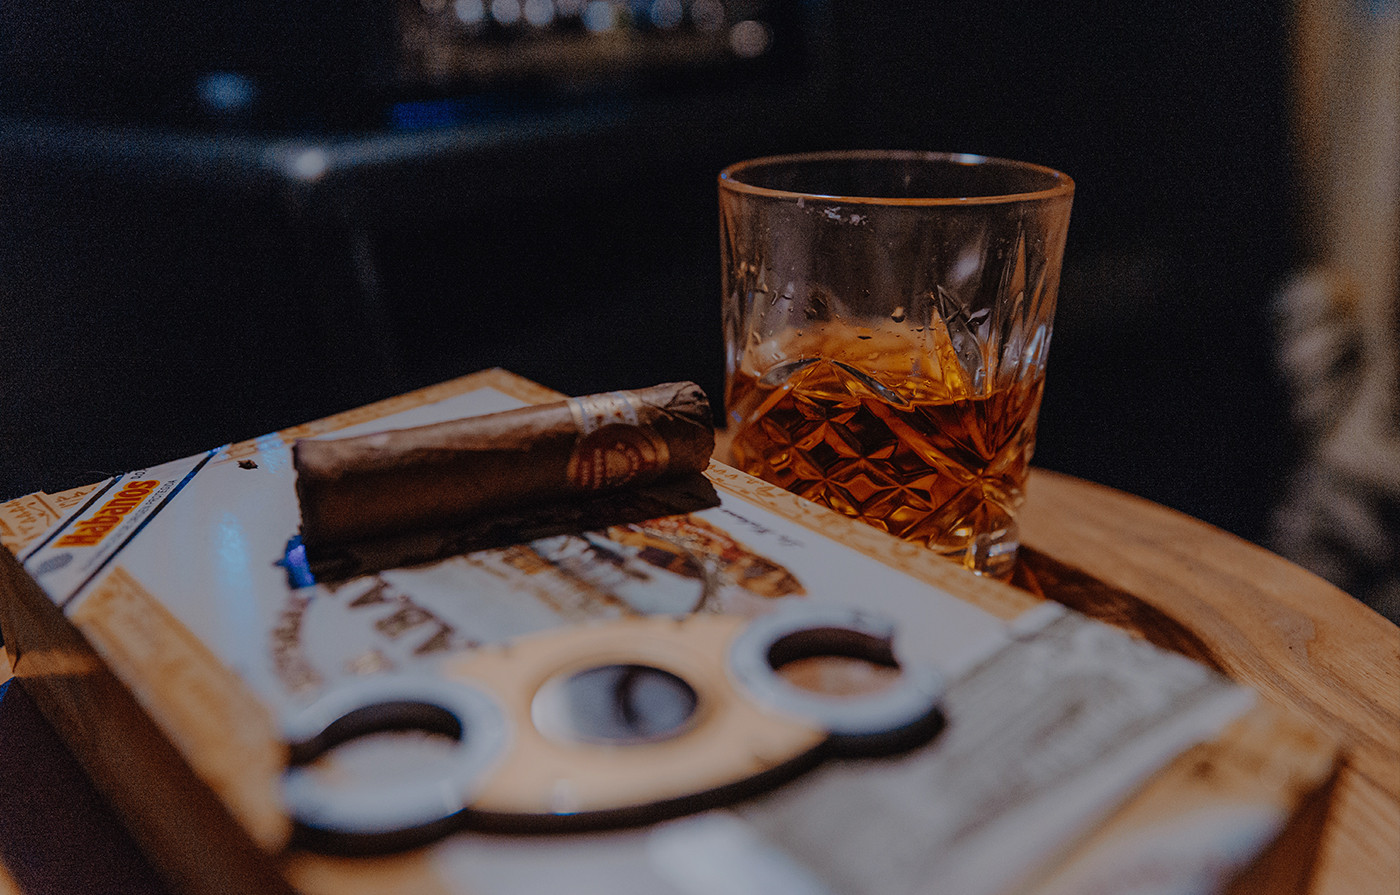 The Ultimate Guide to Cigar Body, Strength and Flavour that you enjoy most.